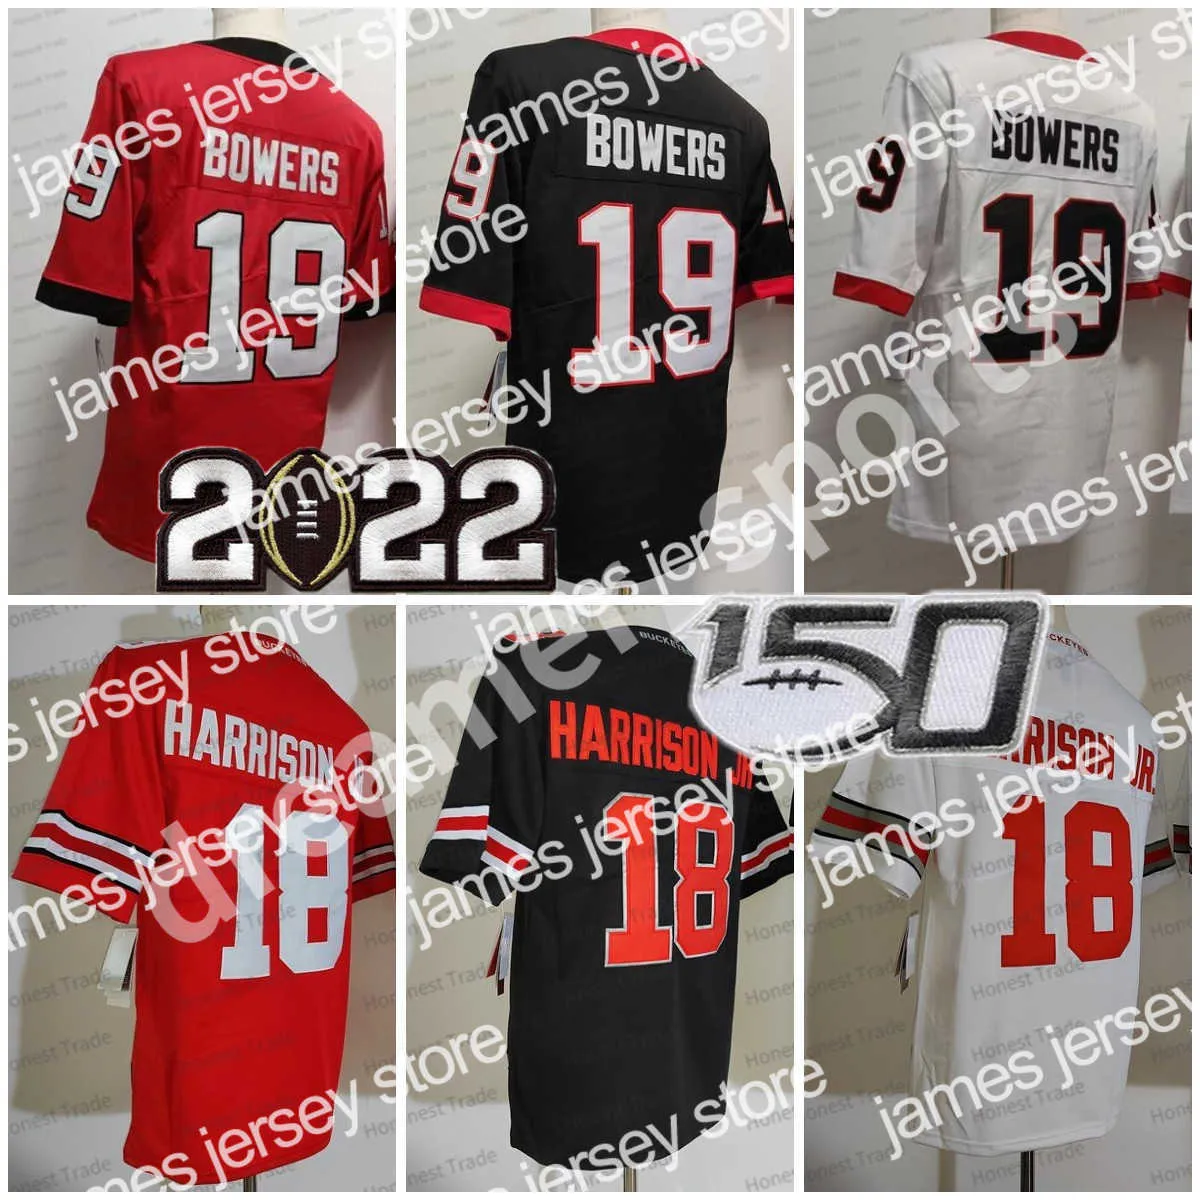 American College Football Wear NCAA Football Jersey 18 Marvin Harrison Jr. 오하이오 주 Buckeyes Brock 19 Bowers New Red White Black Stitched Mens Jerseys 2022 150th